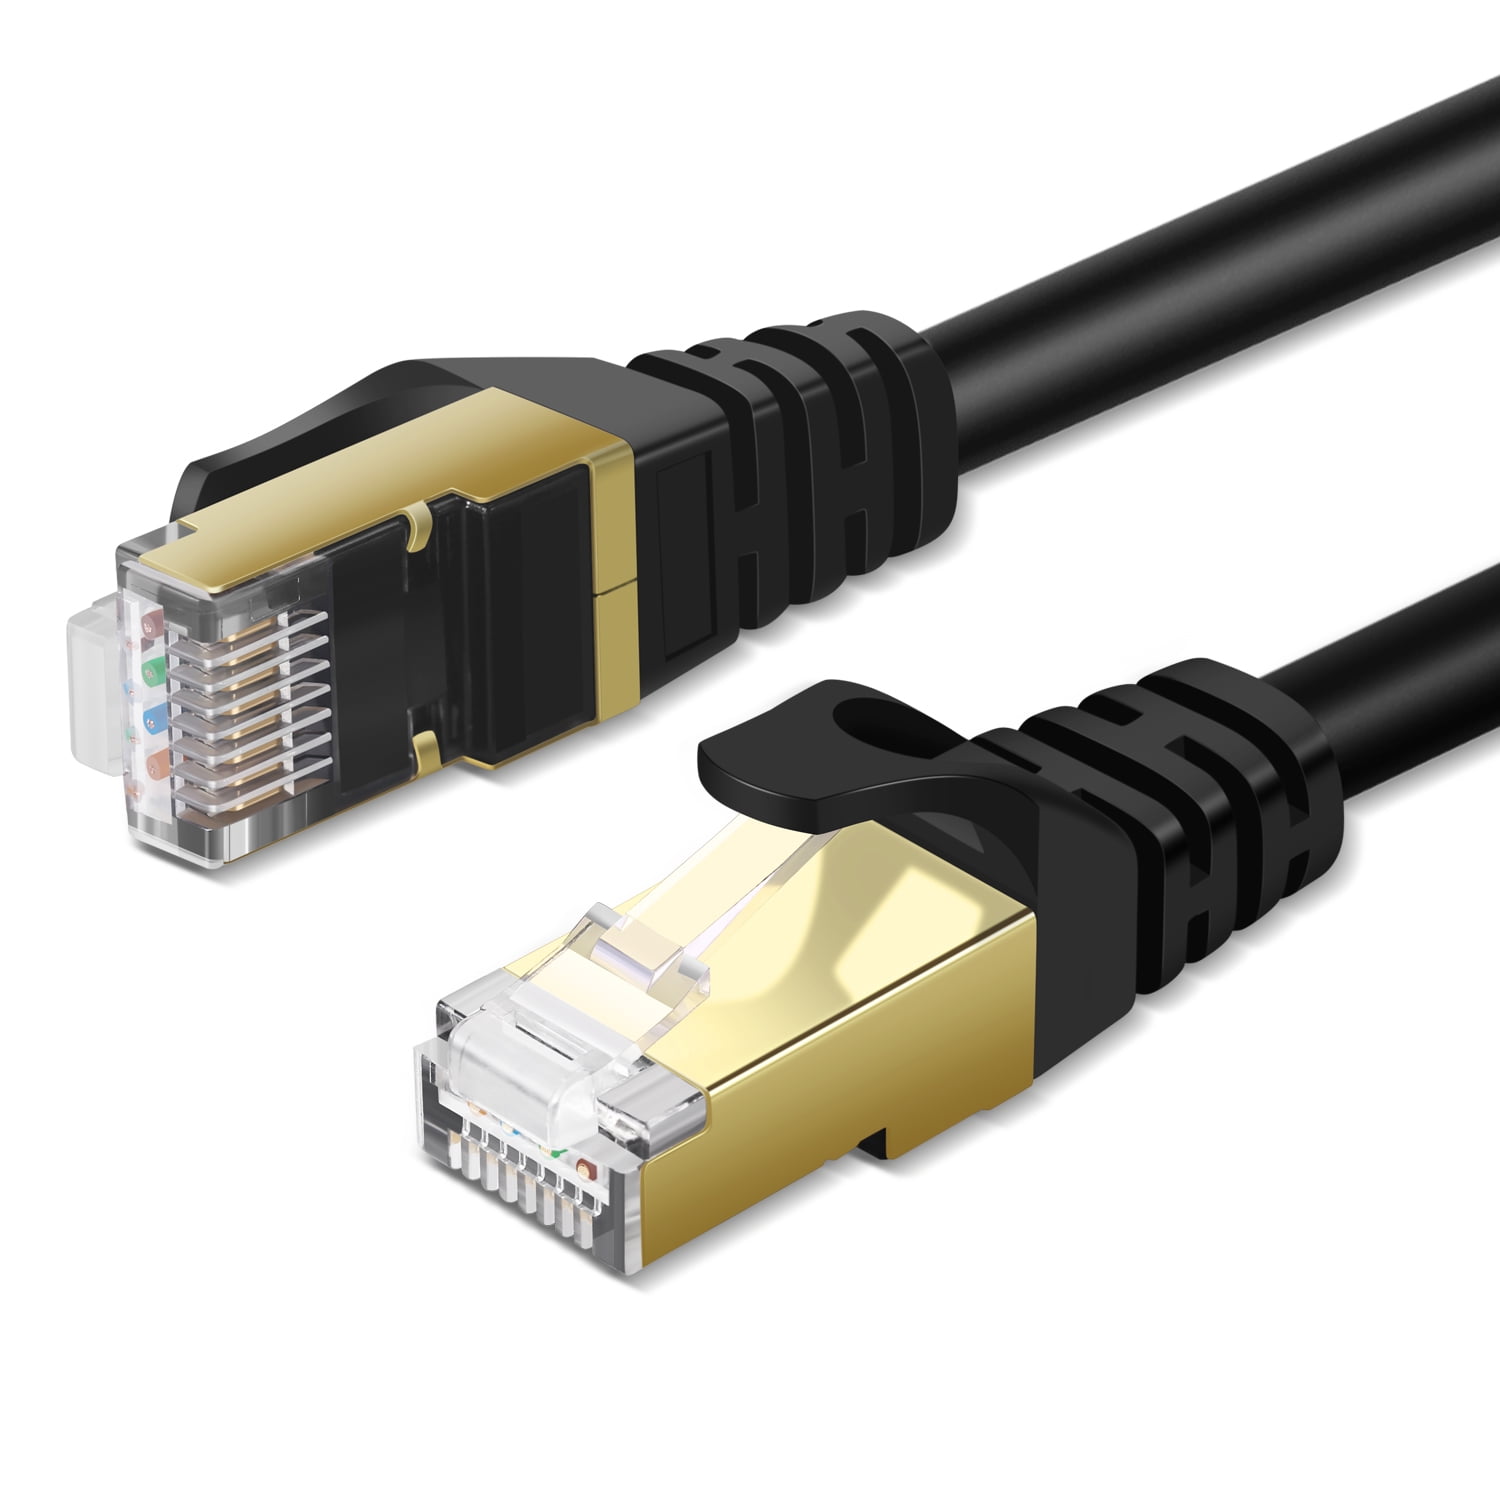 15 Feet （Bundled with The Cable Clips） YUBAO Outdoor RJ45 Ethernet STP Cat5e Network Cable Internet LAN Patch Lead Wholesale 5ft 10ft 15ft 30ft 50ft 65ft 80ft 100ft 160ft 330ft